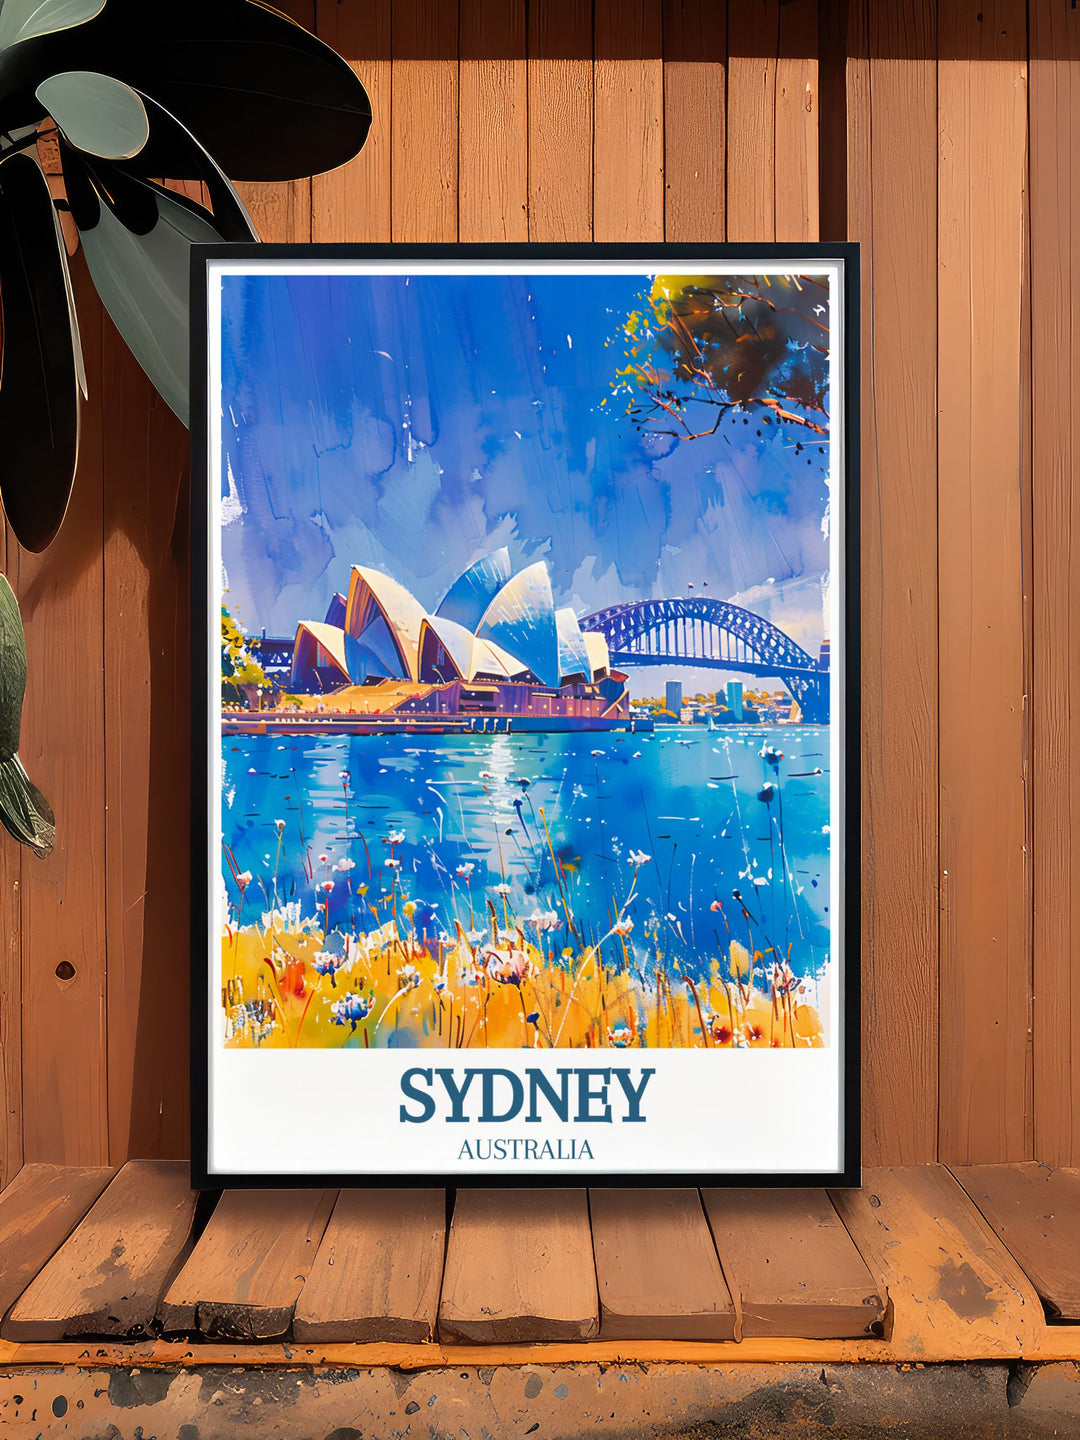 Detailed and colorful vintage travel print showcasing the Sydney Opera House and Sydney Harbour Bridge an ideal piece for those who love Australia and its iconic cityscapes perfect for home decor or gifting